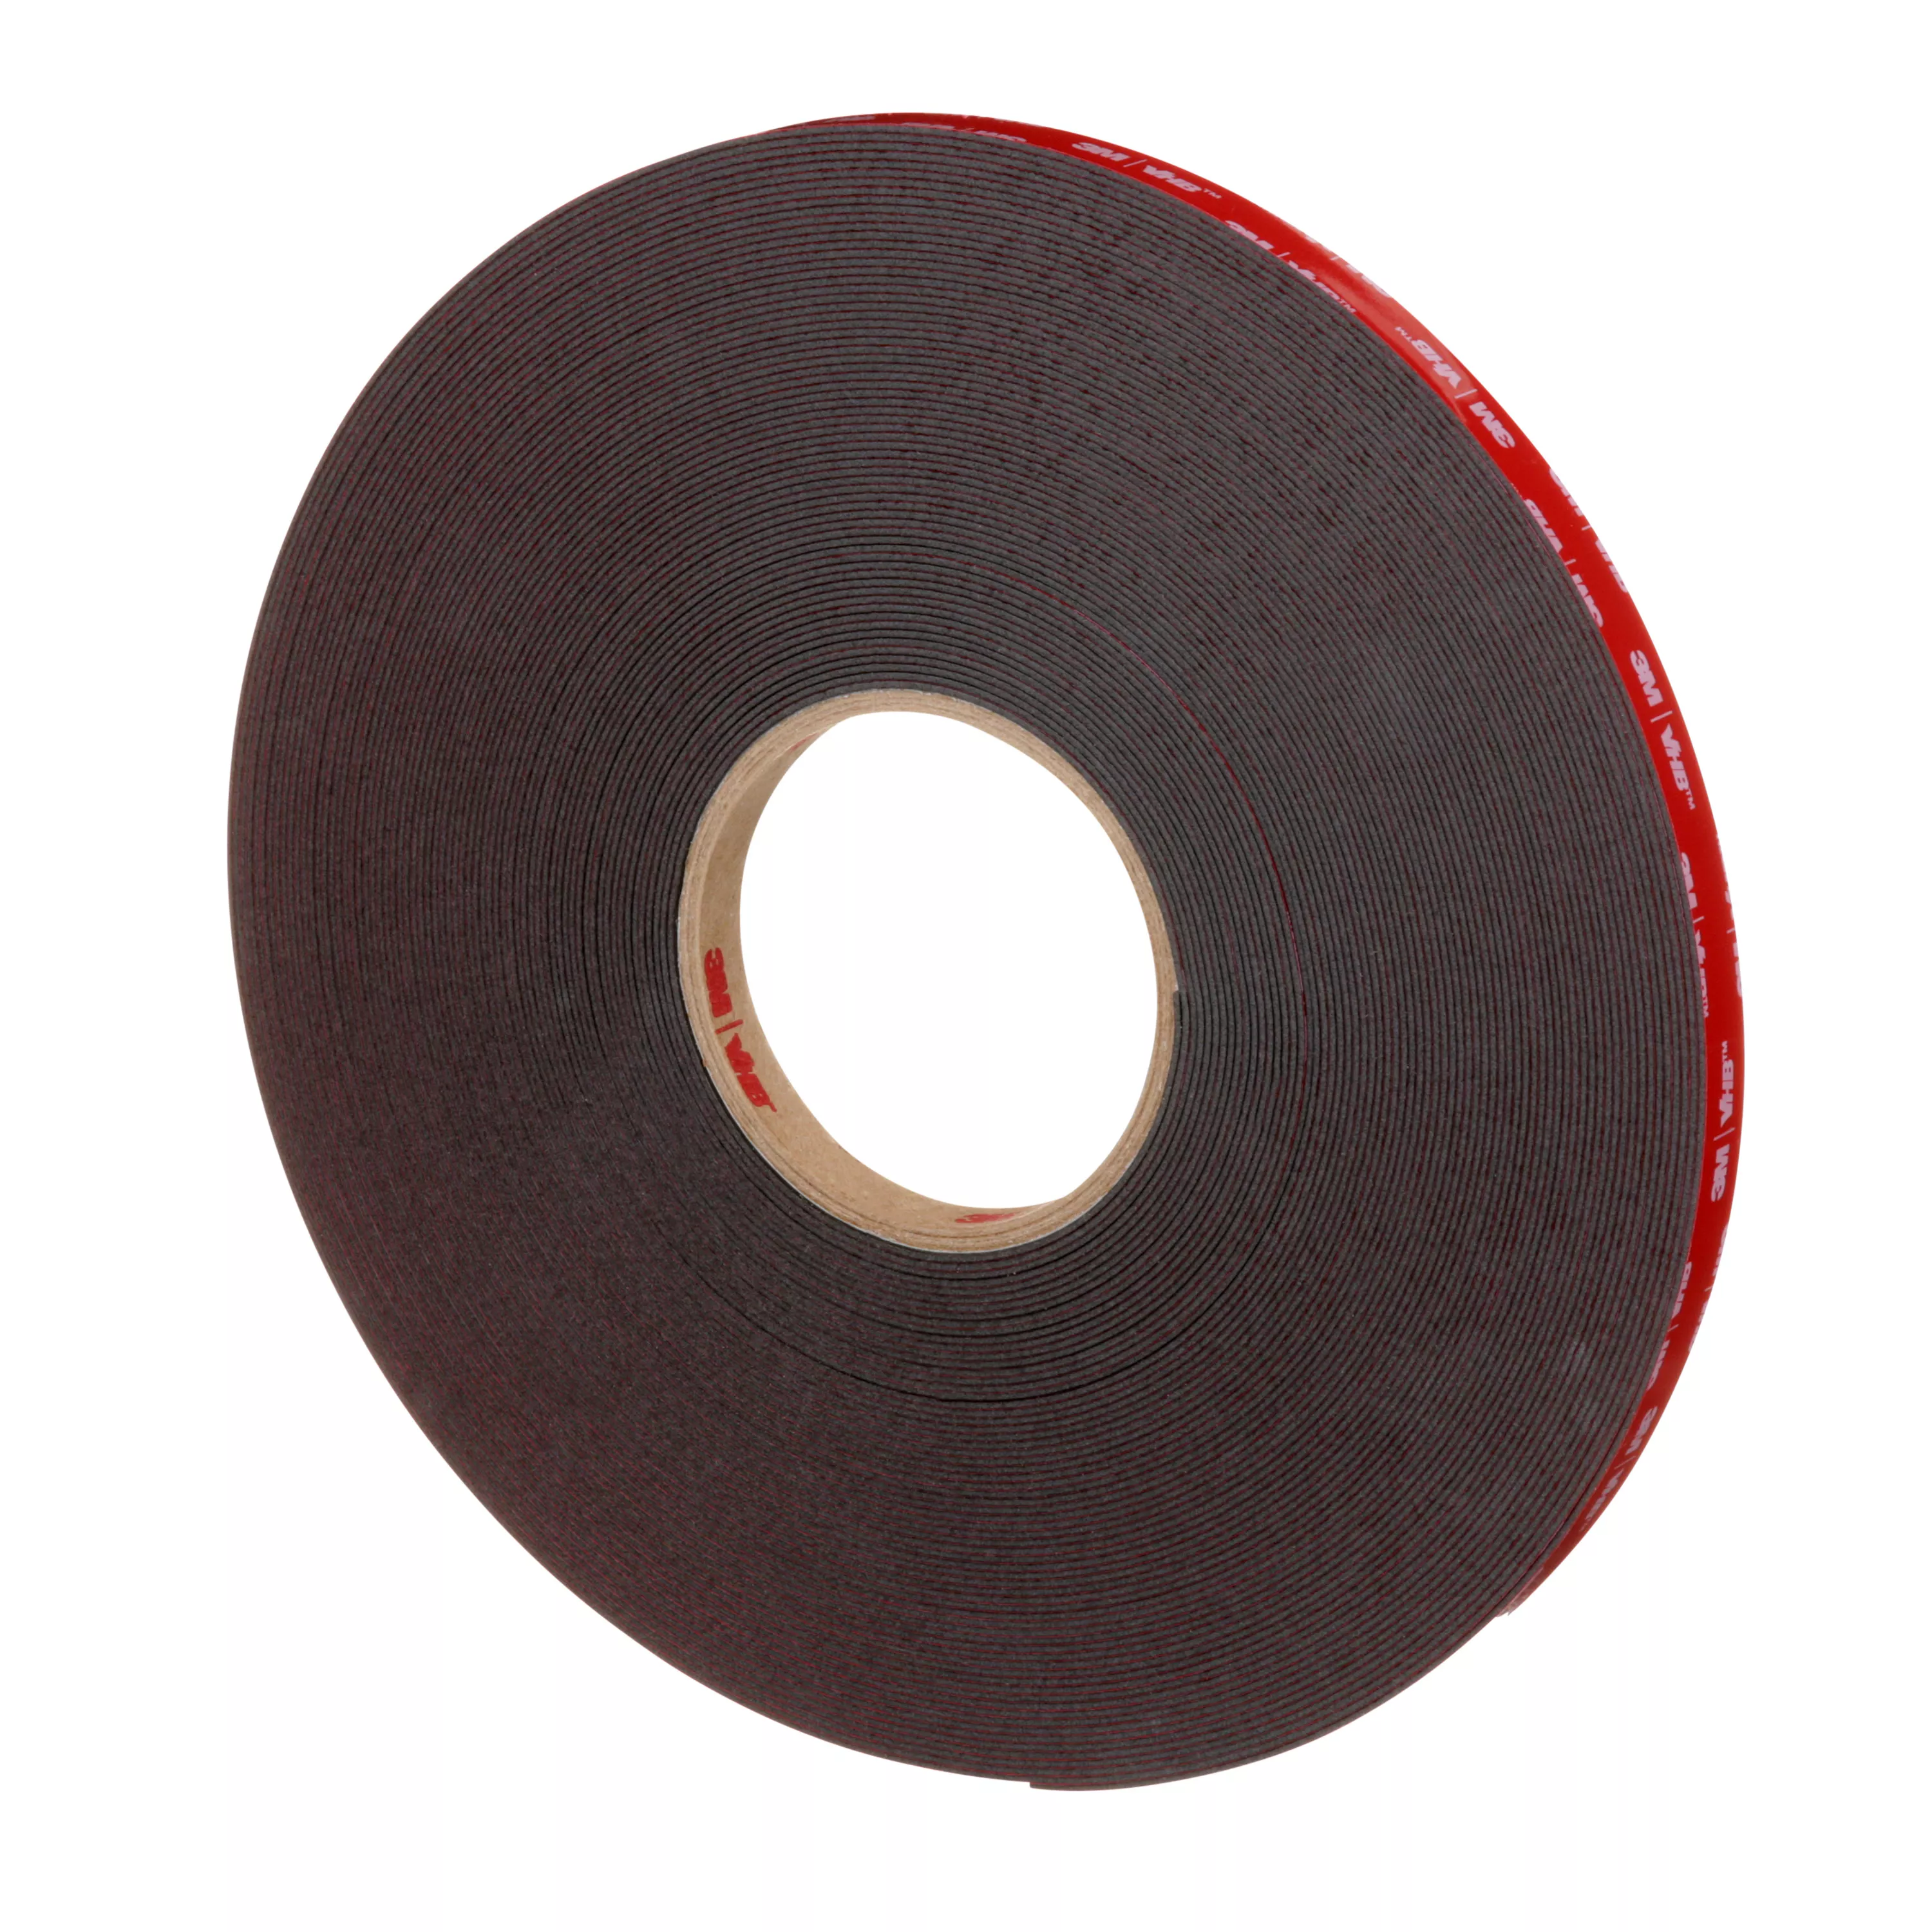 Product Number 4947 | 3M™ VHB™ Tape 4947F